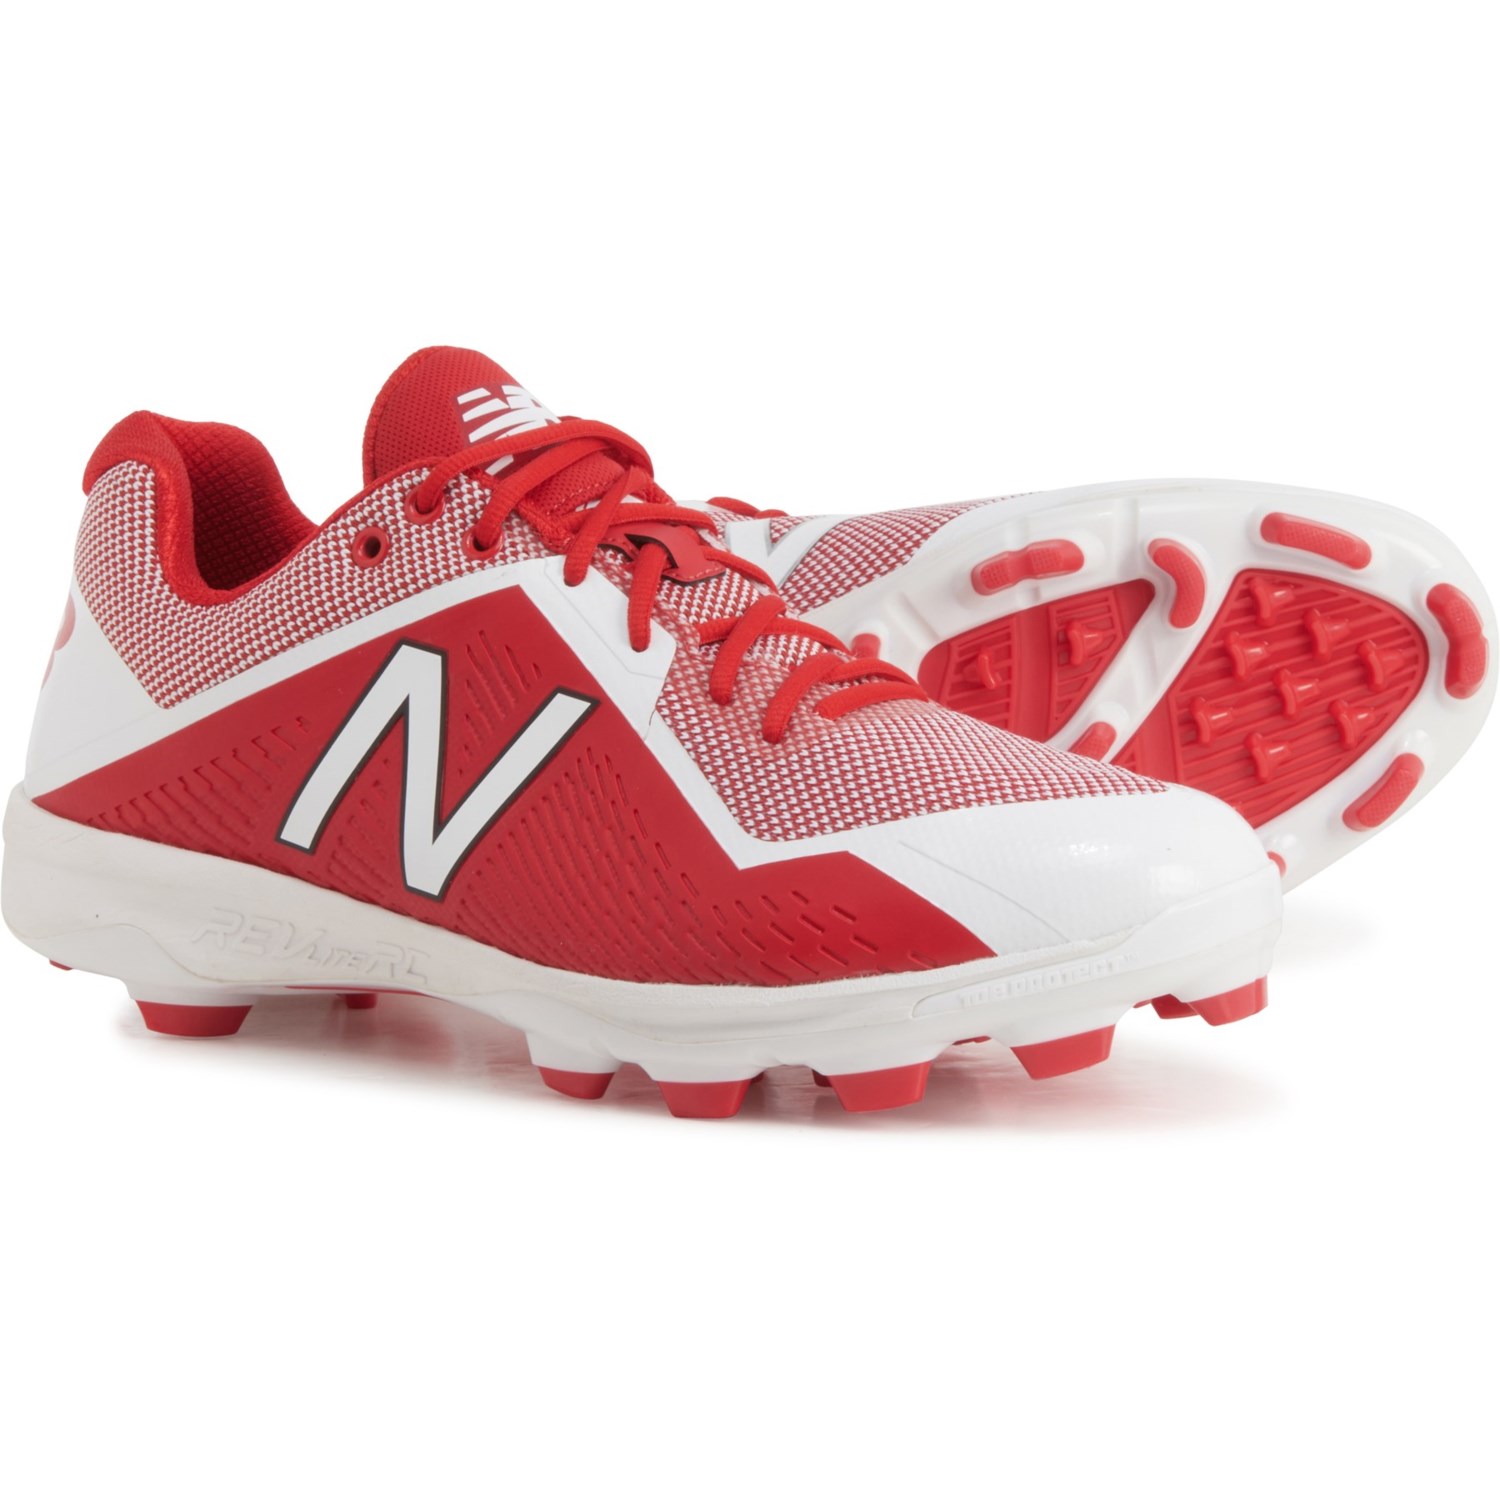 New Balance 4040 Baseball Cleats - Molded Cleats (For Men)